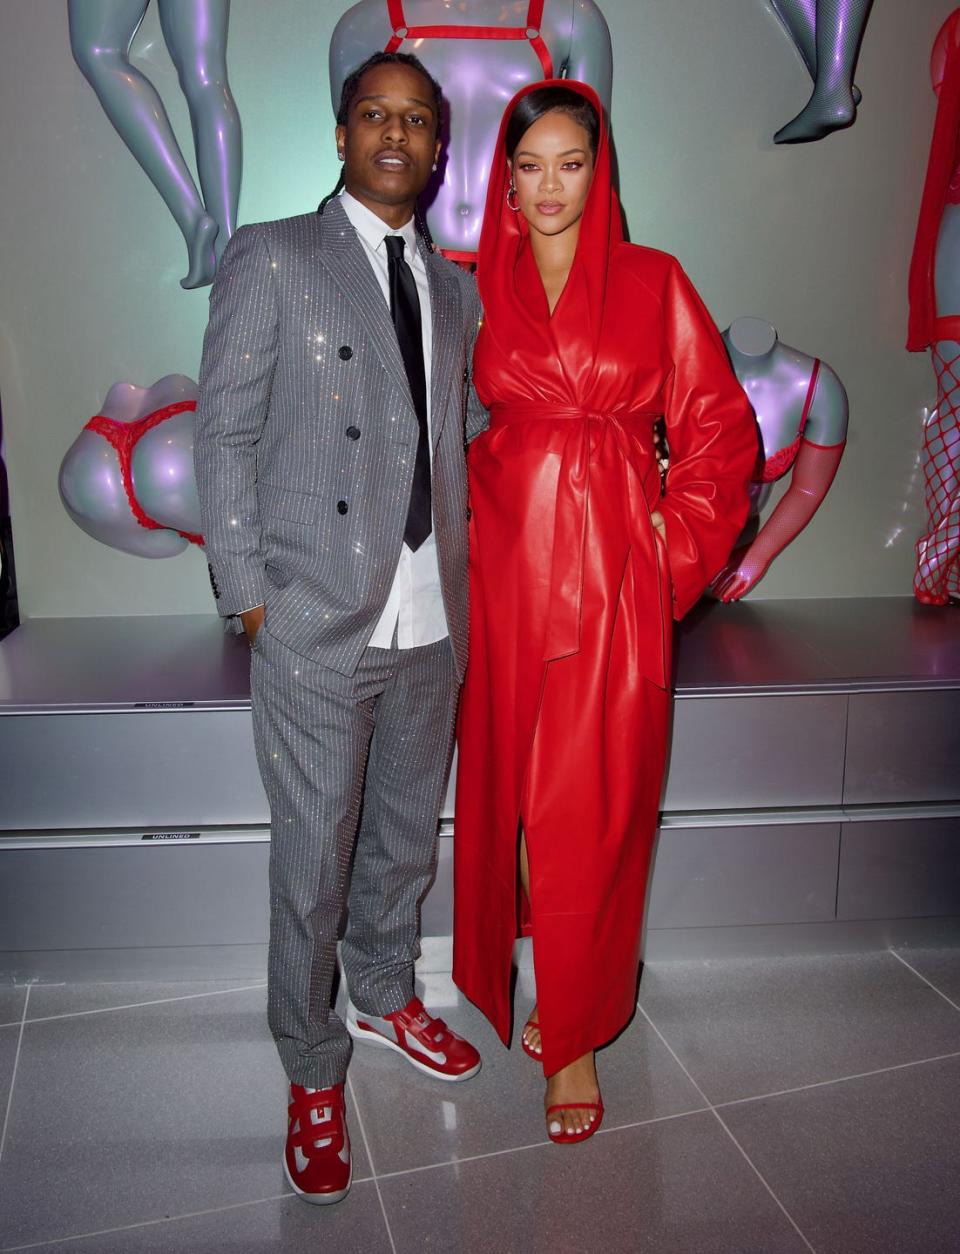 12) Rihanna and ASAP Rocky at a Fenty event in Los Angeles, February 2022